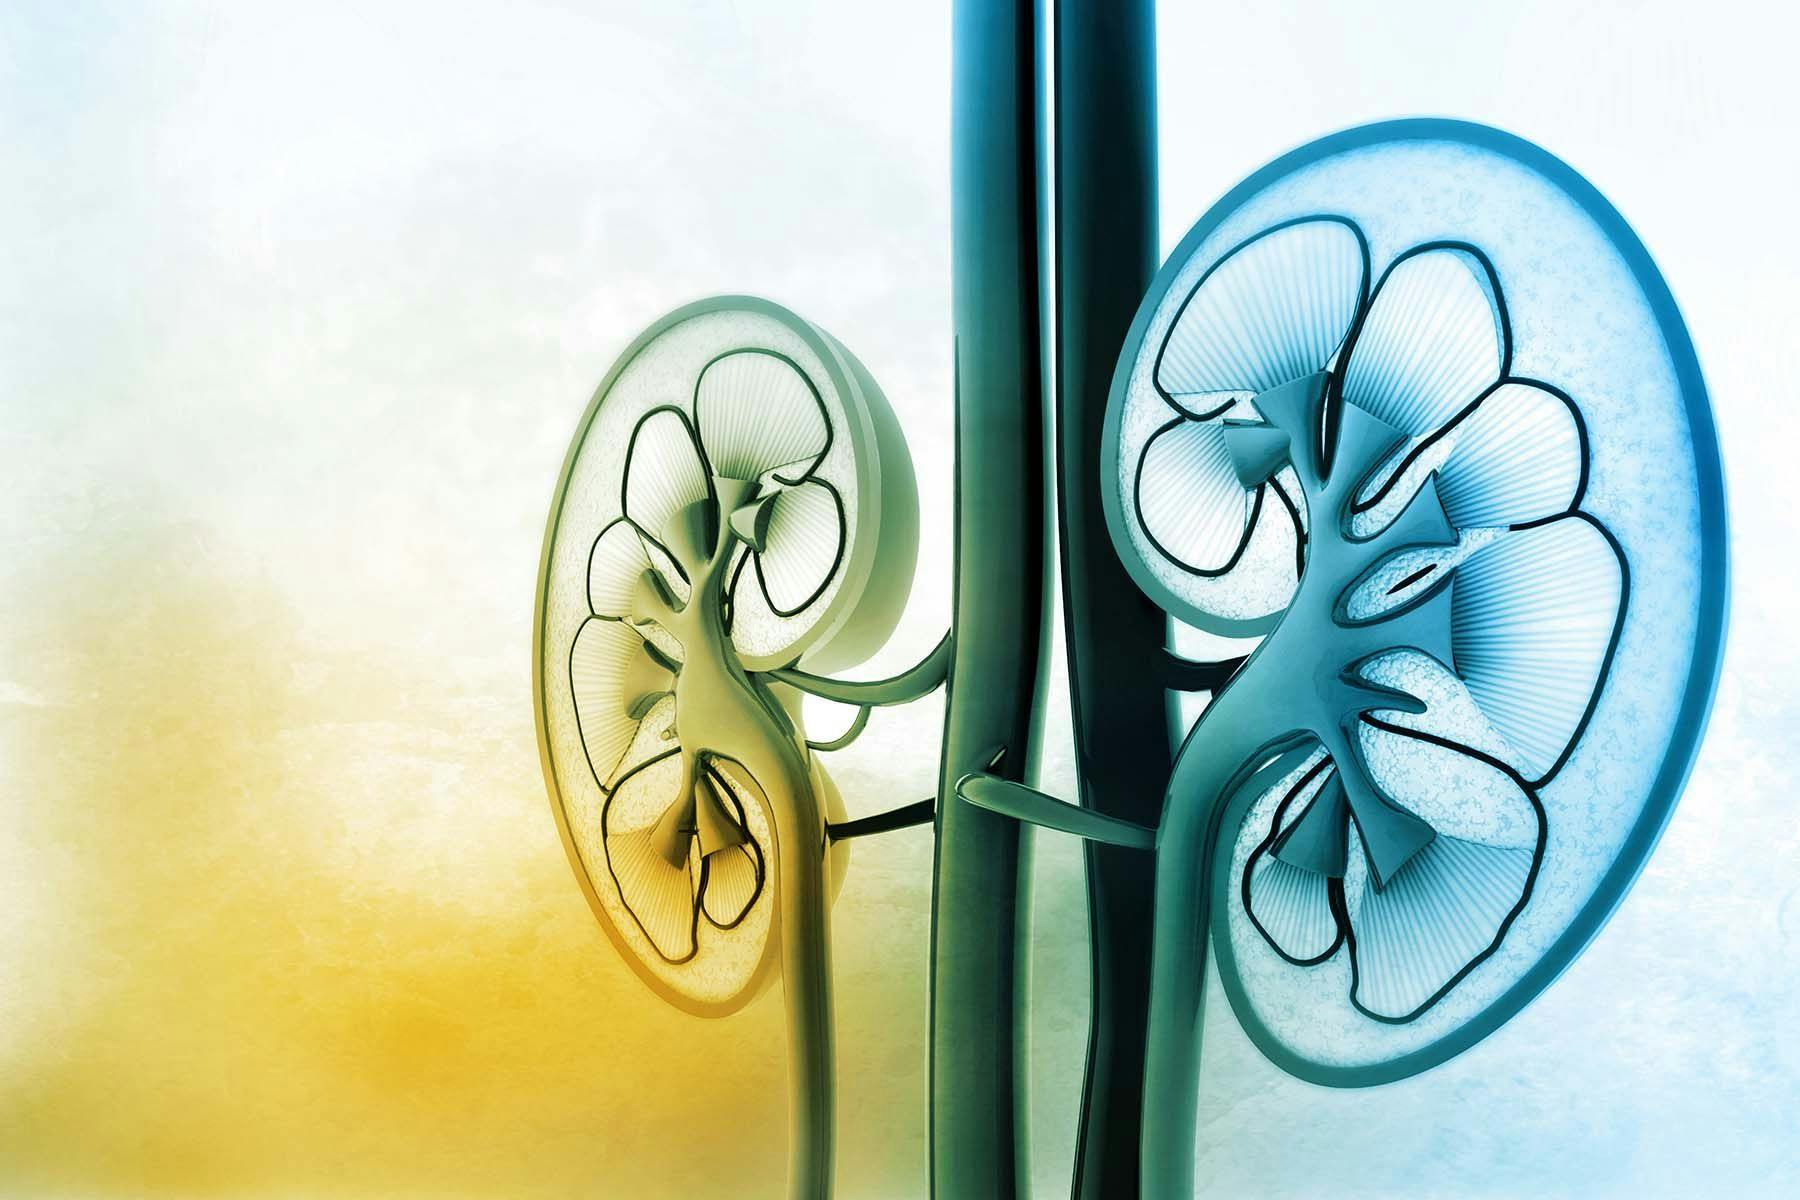 a computerized image of 2 kidneys over a watercolor background